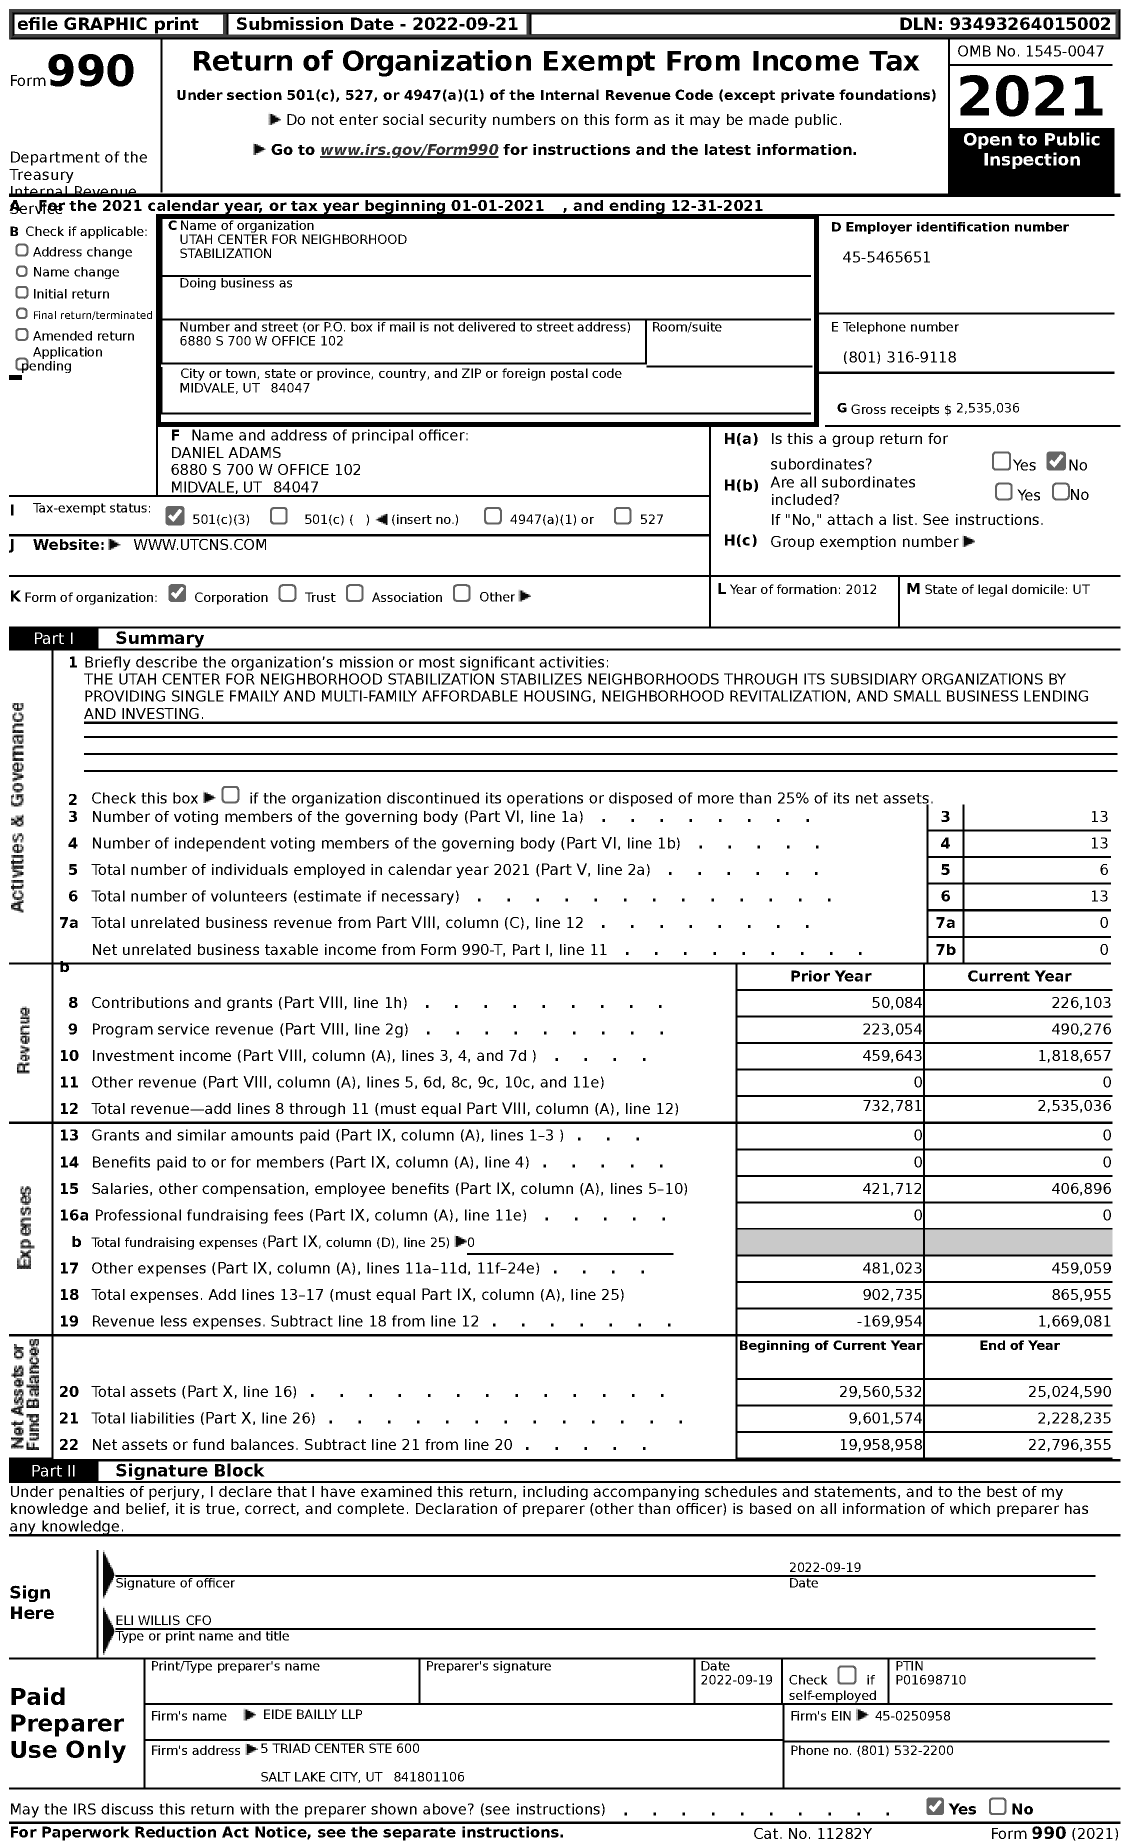 Image of first page of 2021 Form 990 for Utah Center for Neighborhood Stabilization